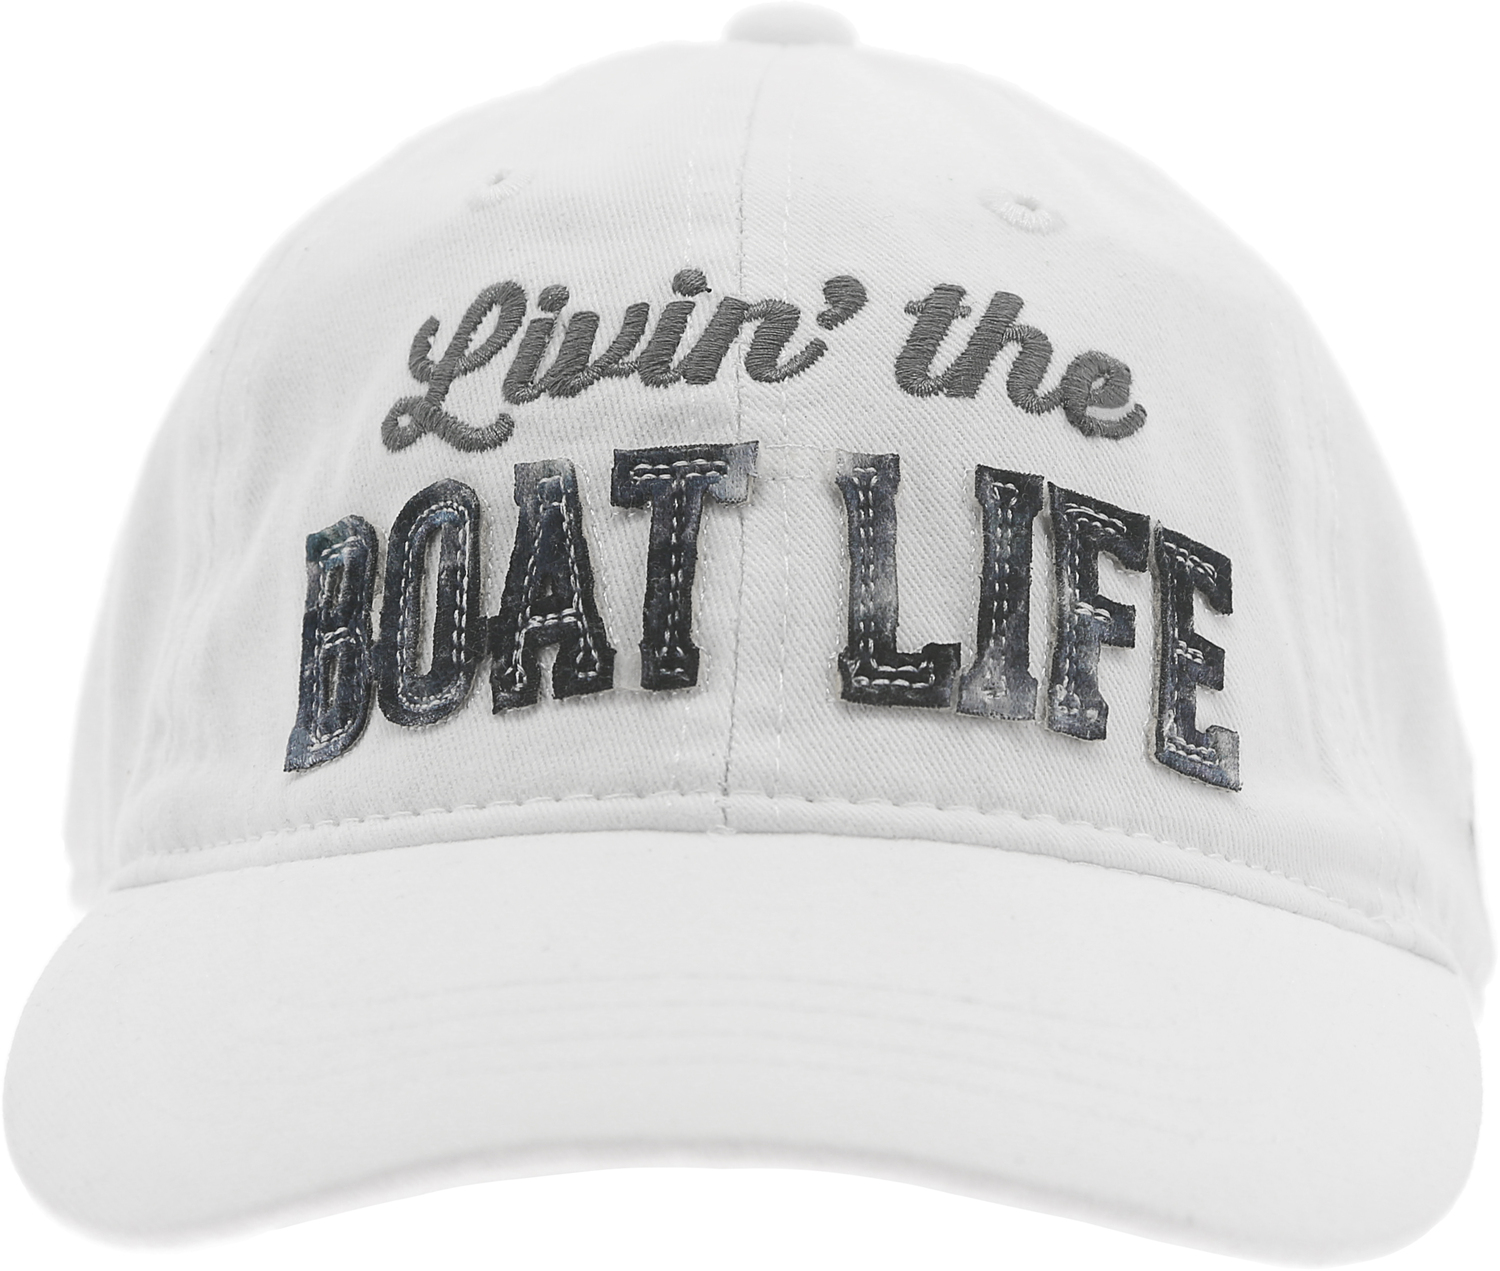 Boat Life by We People - Boat Life - White Adjustable Hat